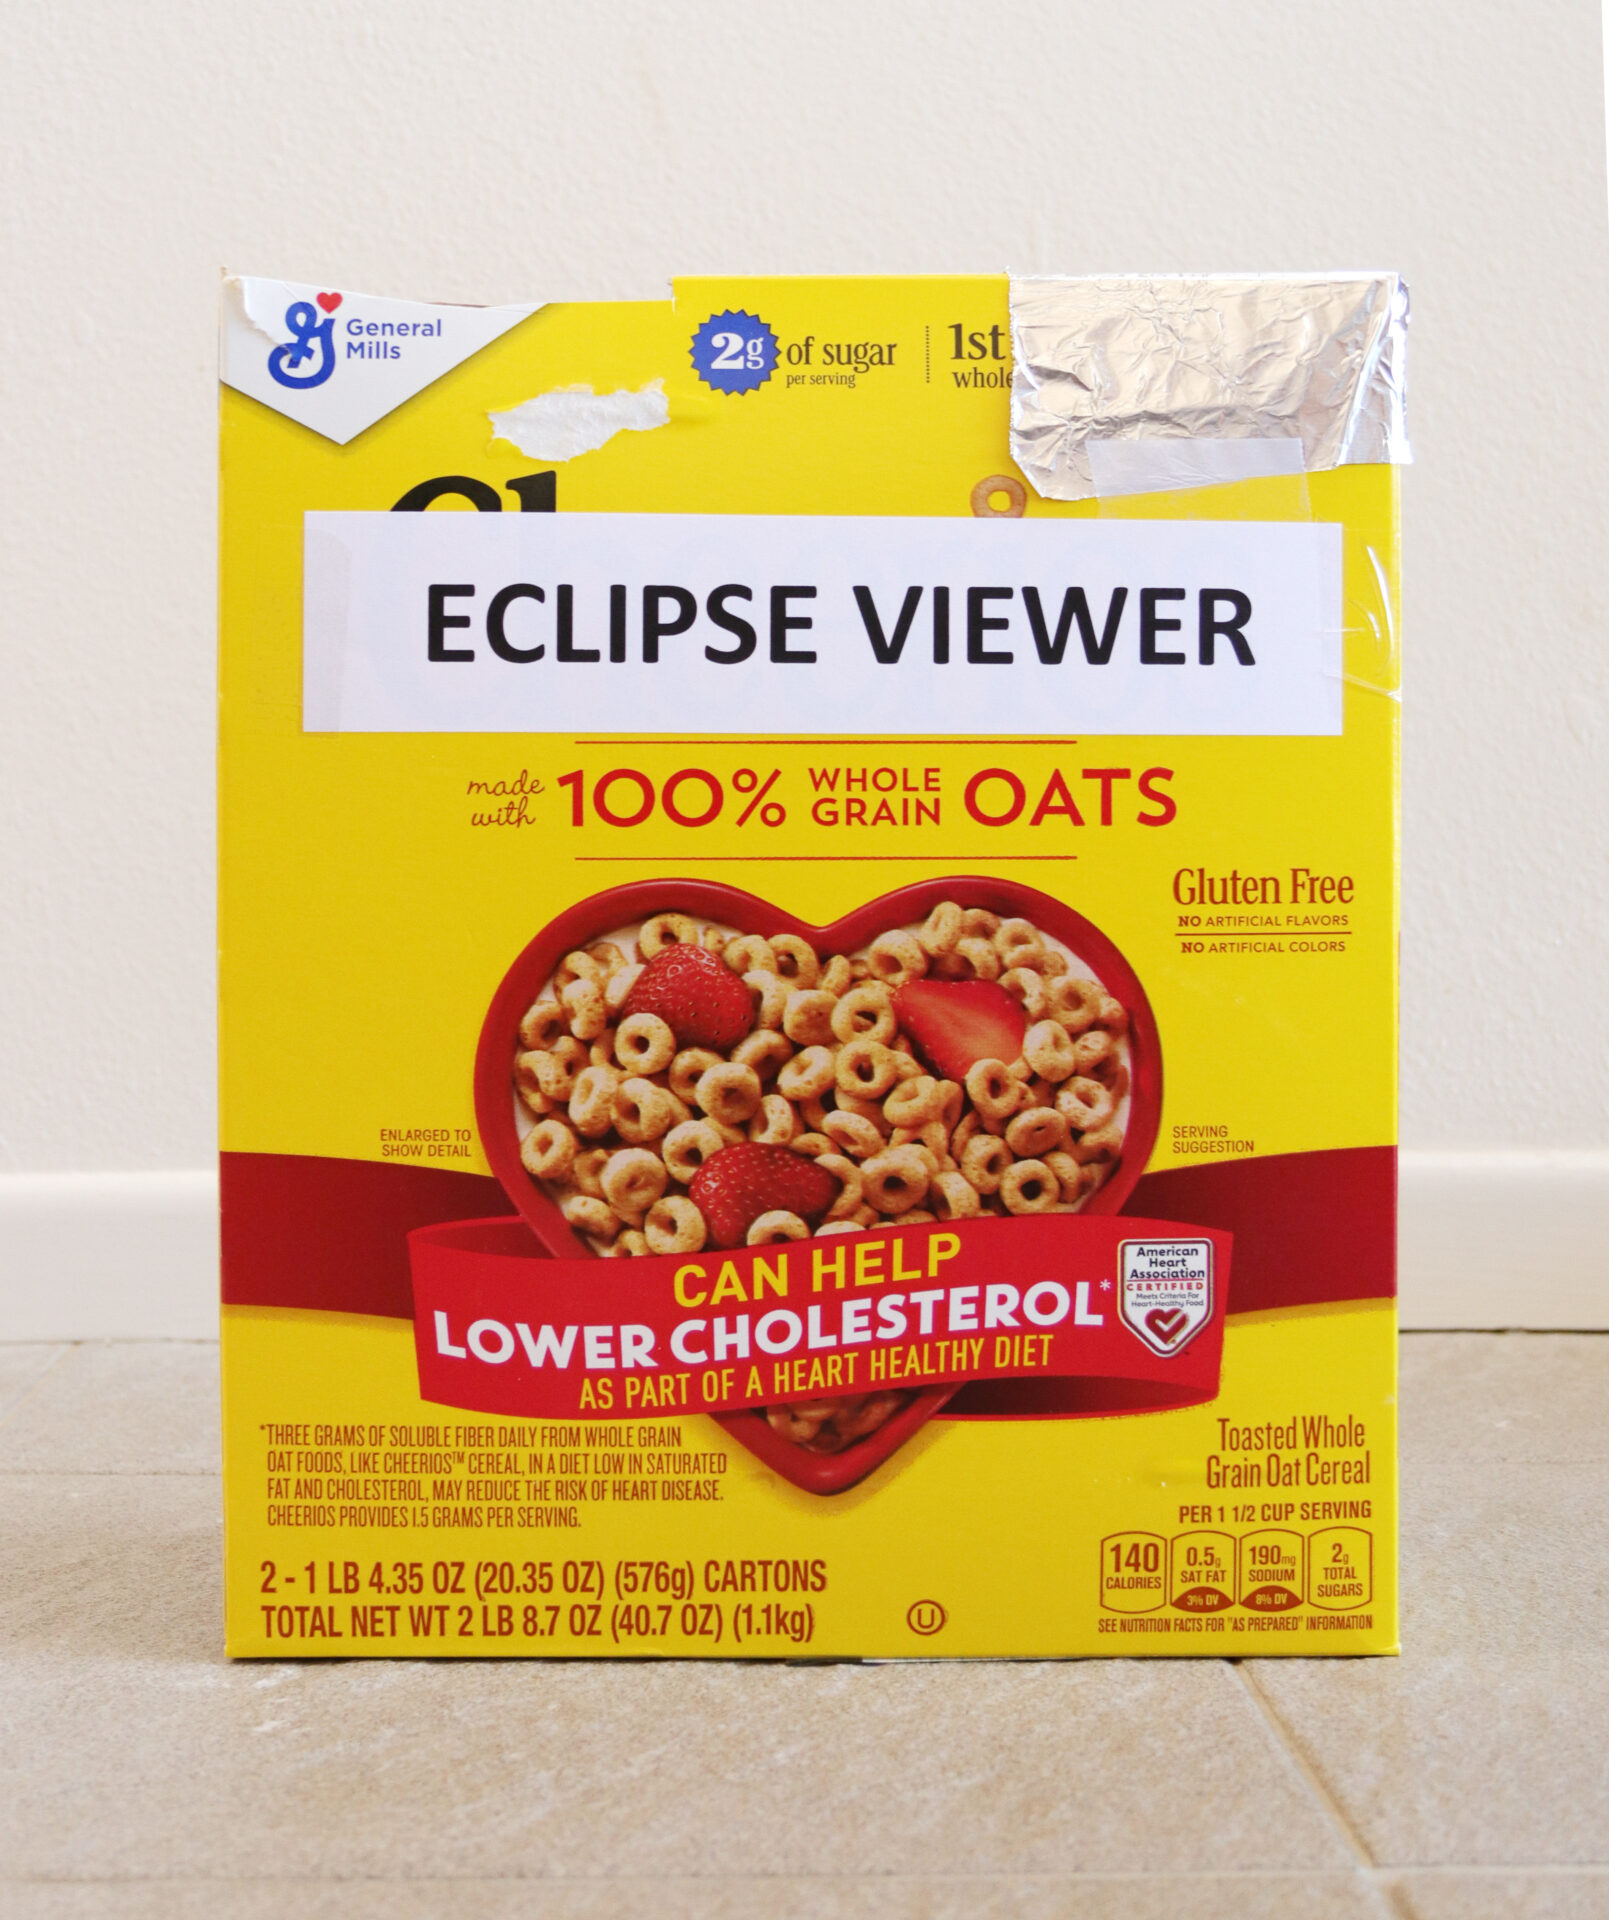 Create a Viewing Box from an empty cereal box